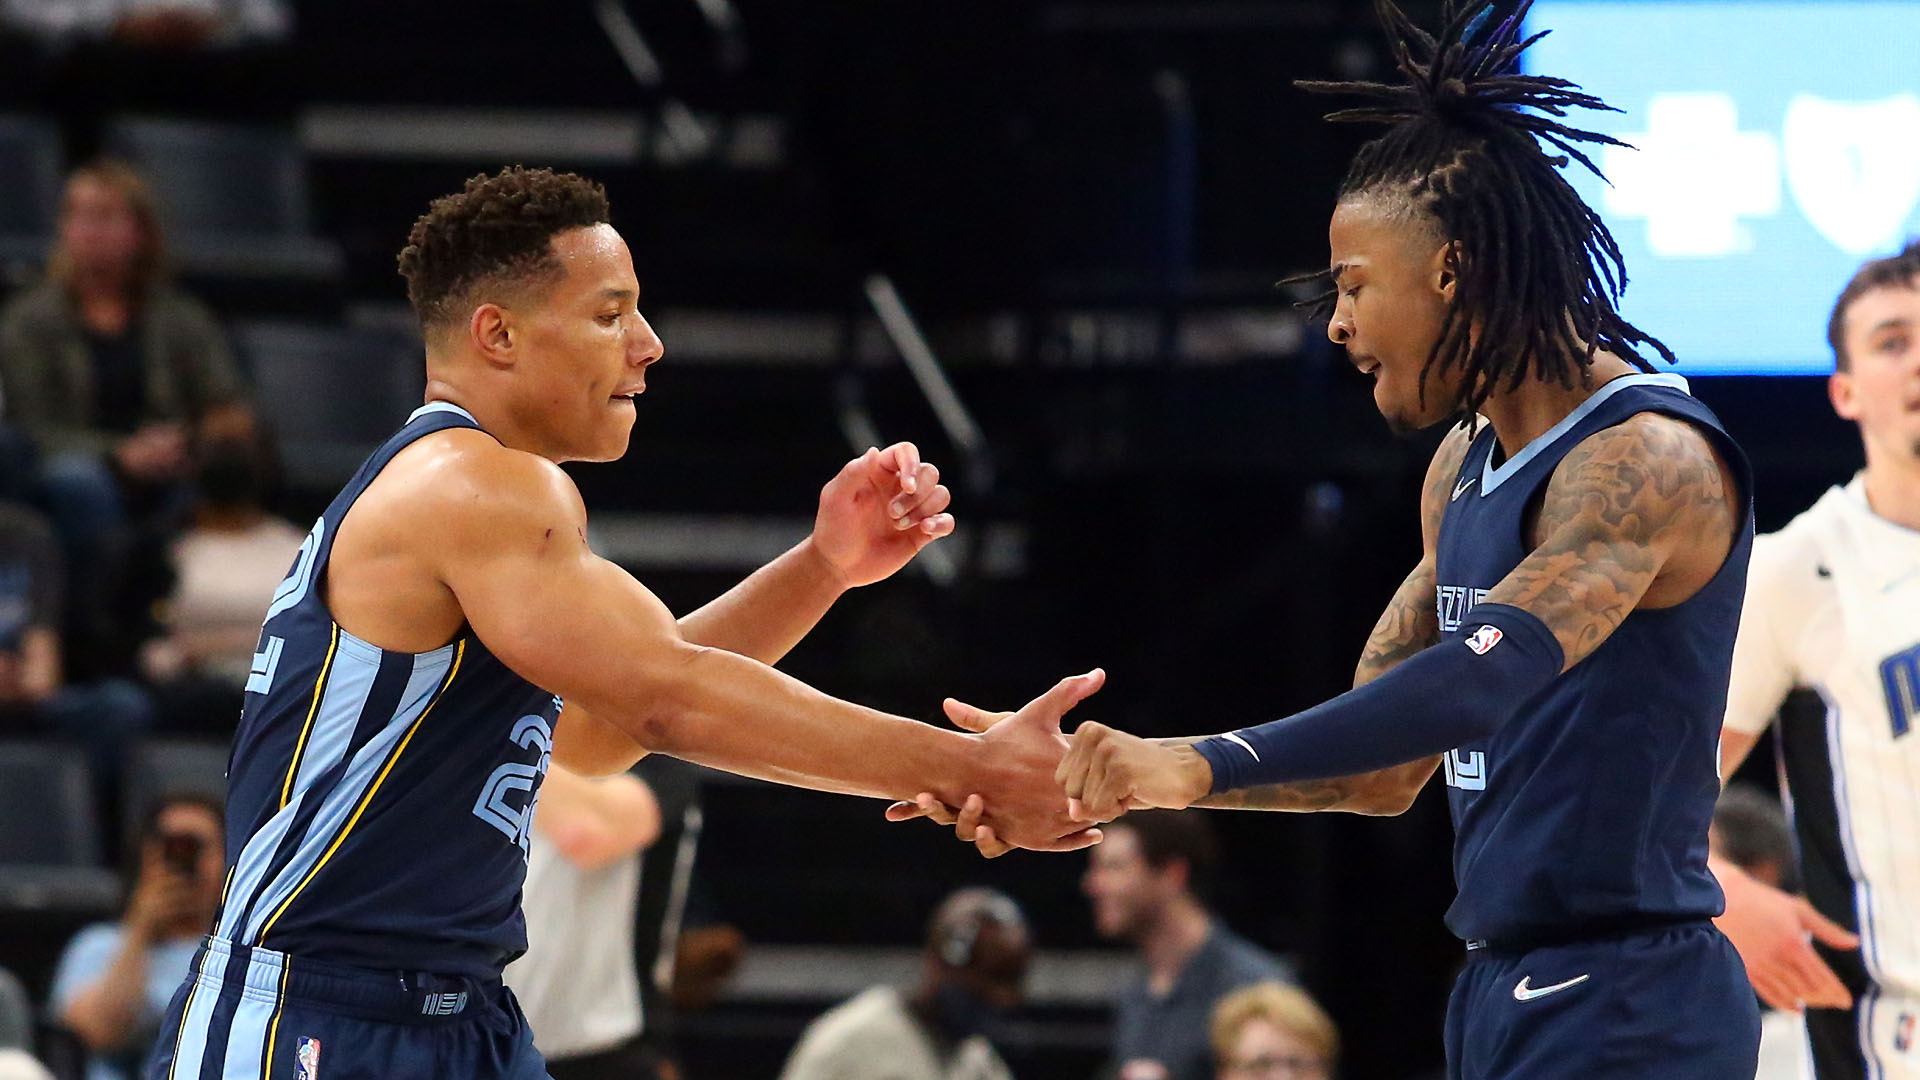 Desmond Bane's Leap Gives Ja Morant, Grizzlies Co Star They Need